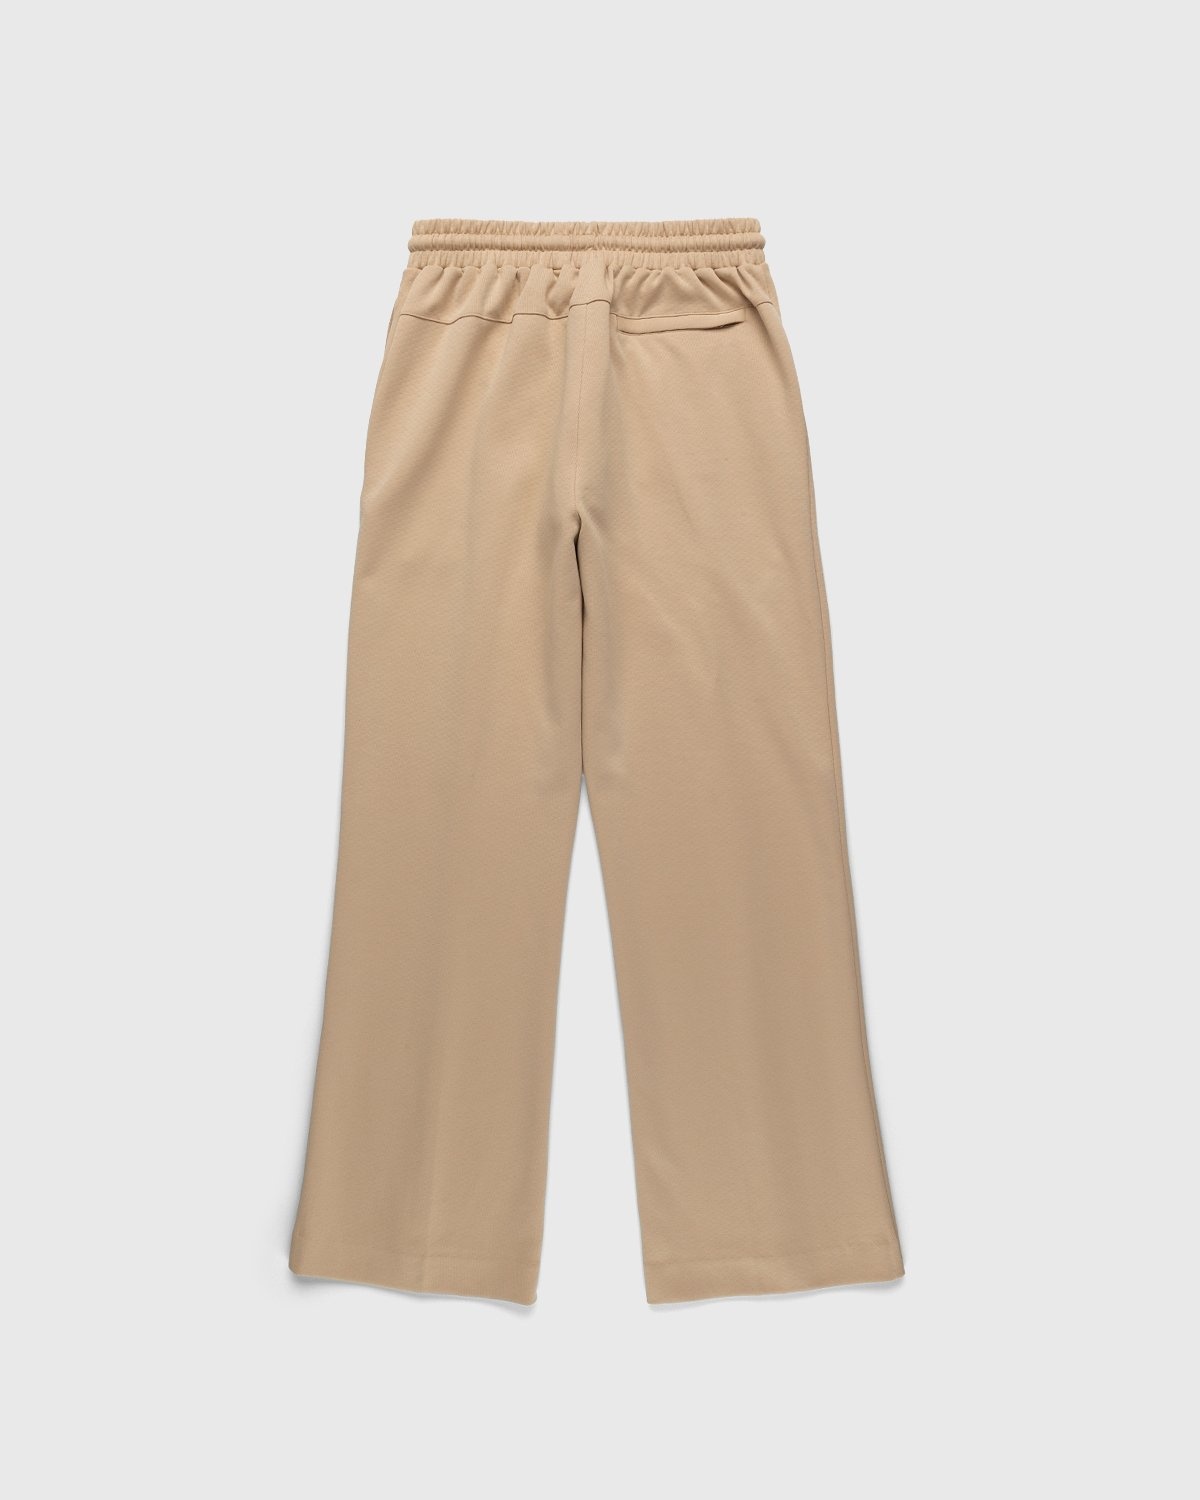 Puma x AMI – Wide Logo Pants Ginger Root - Trousers - Beige - Image 2